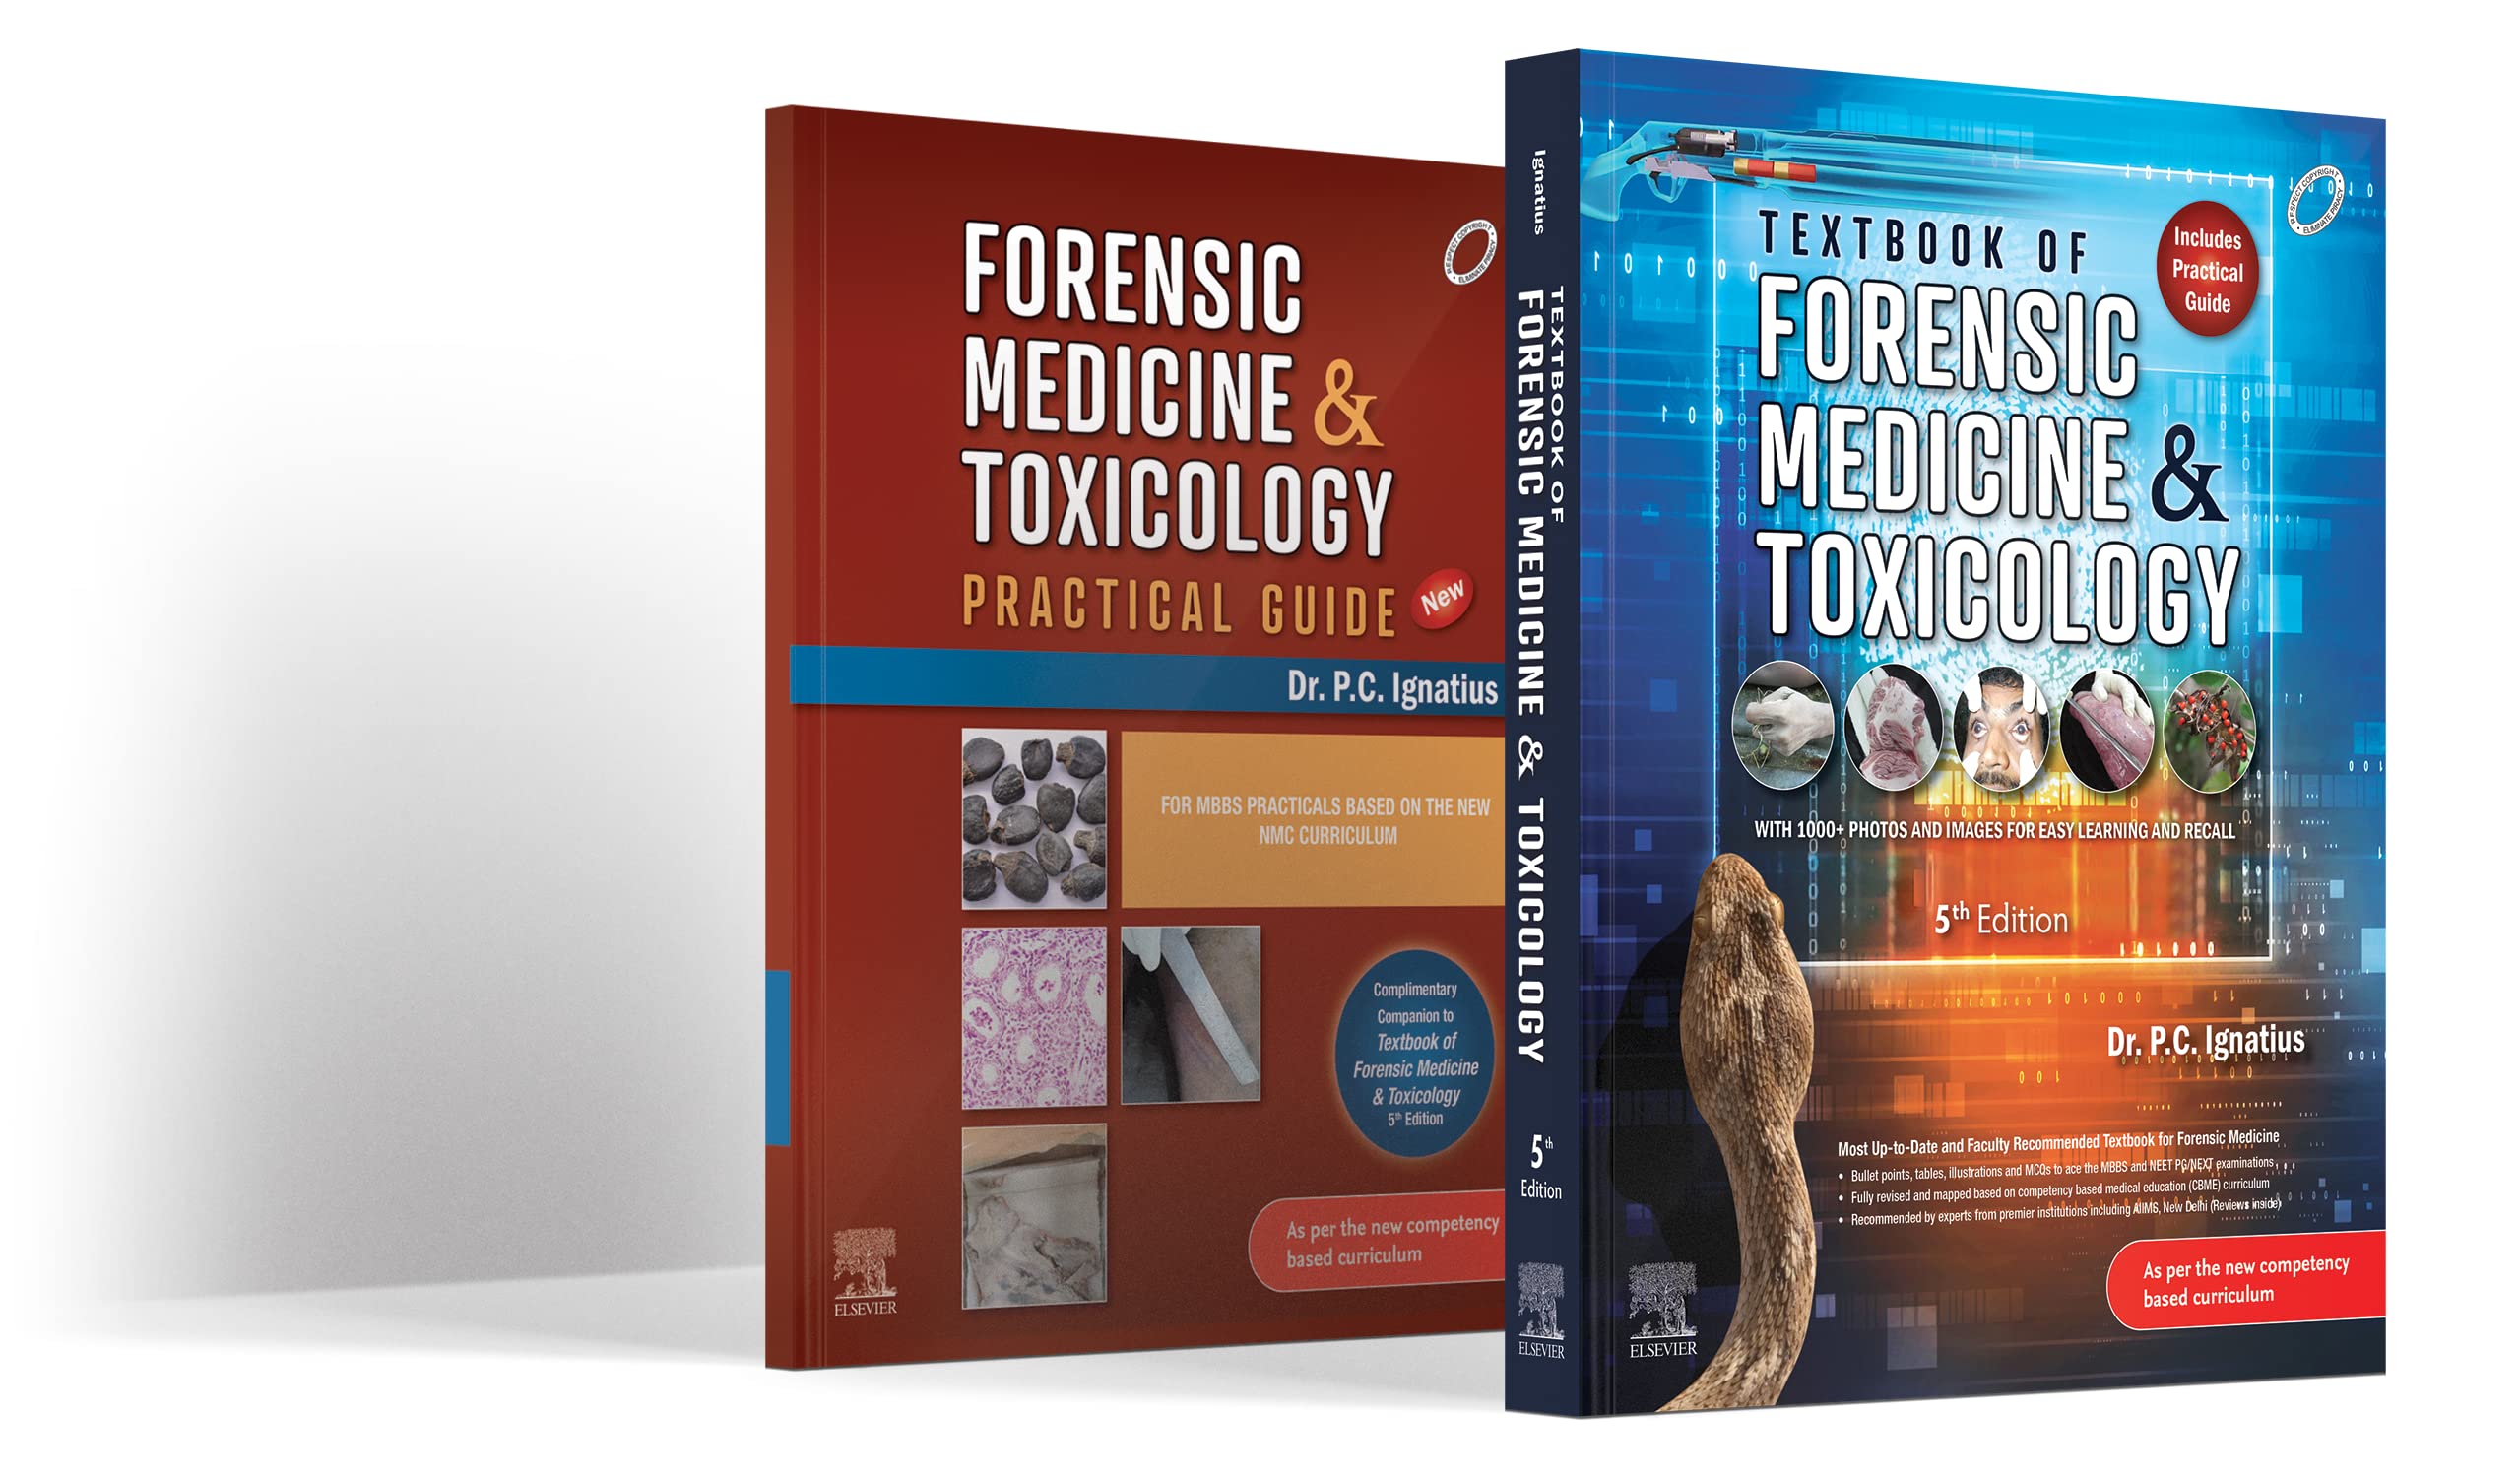 Textbook of Forensic Medicine & Toxicology, 5ed.; Forensic Medicine and Toxicology: Practical Guide